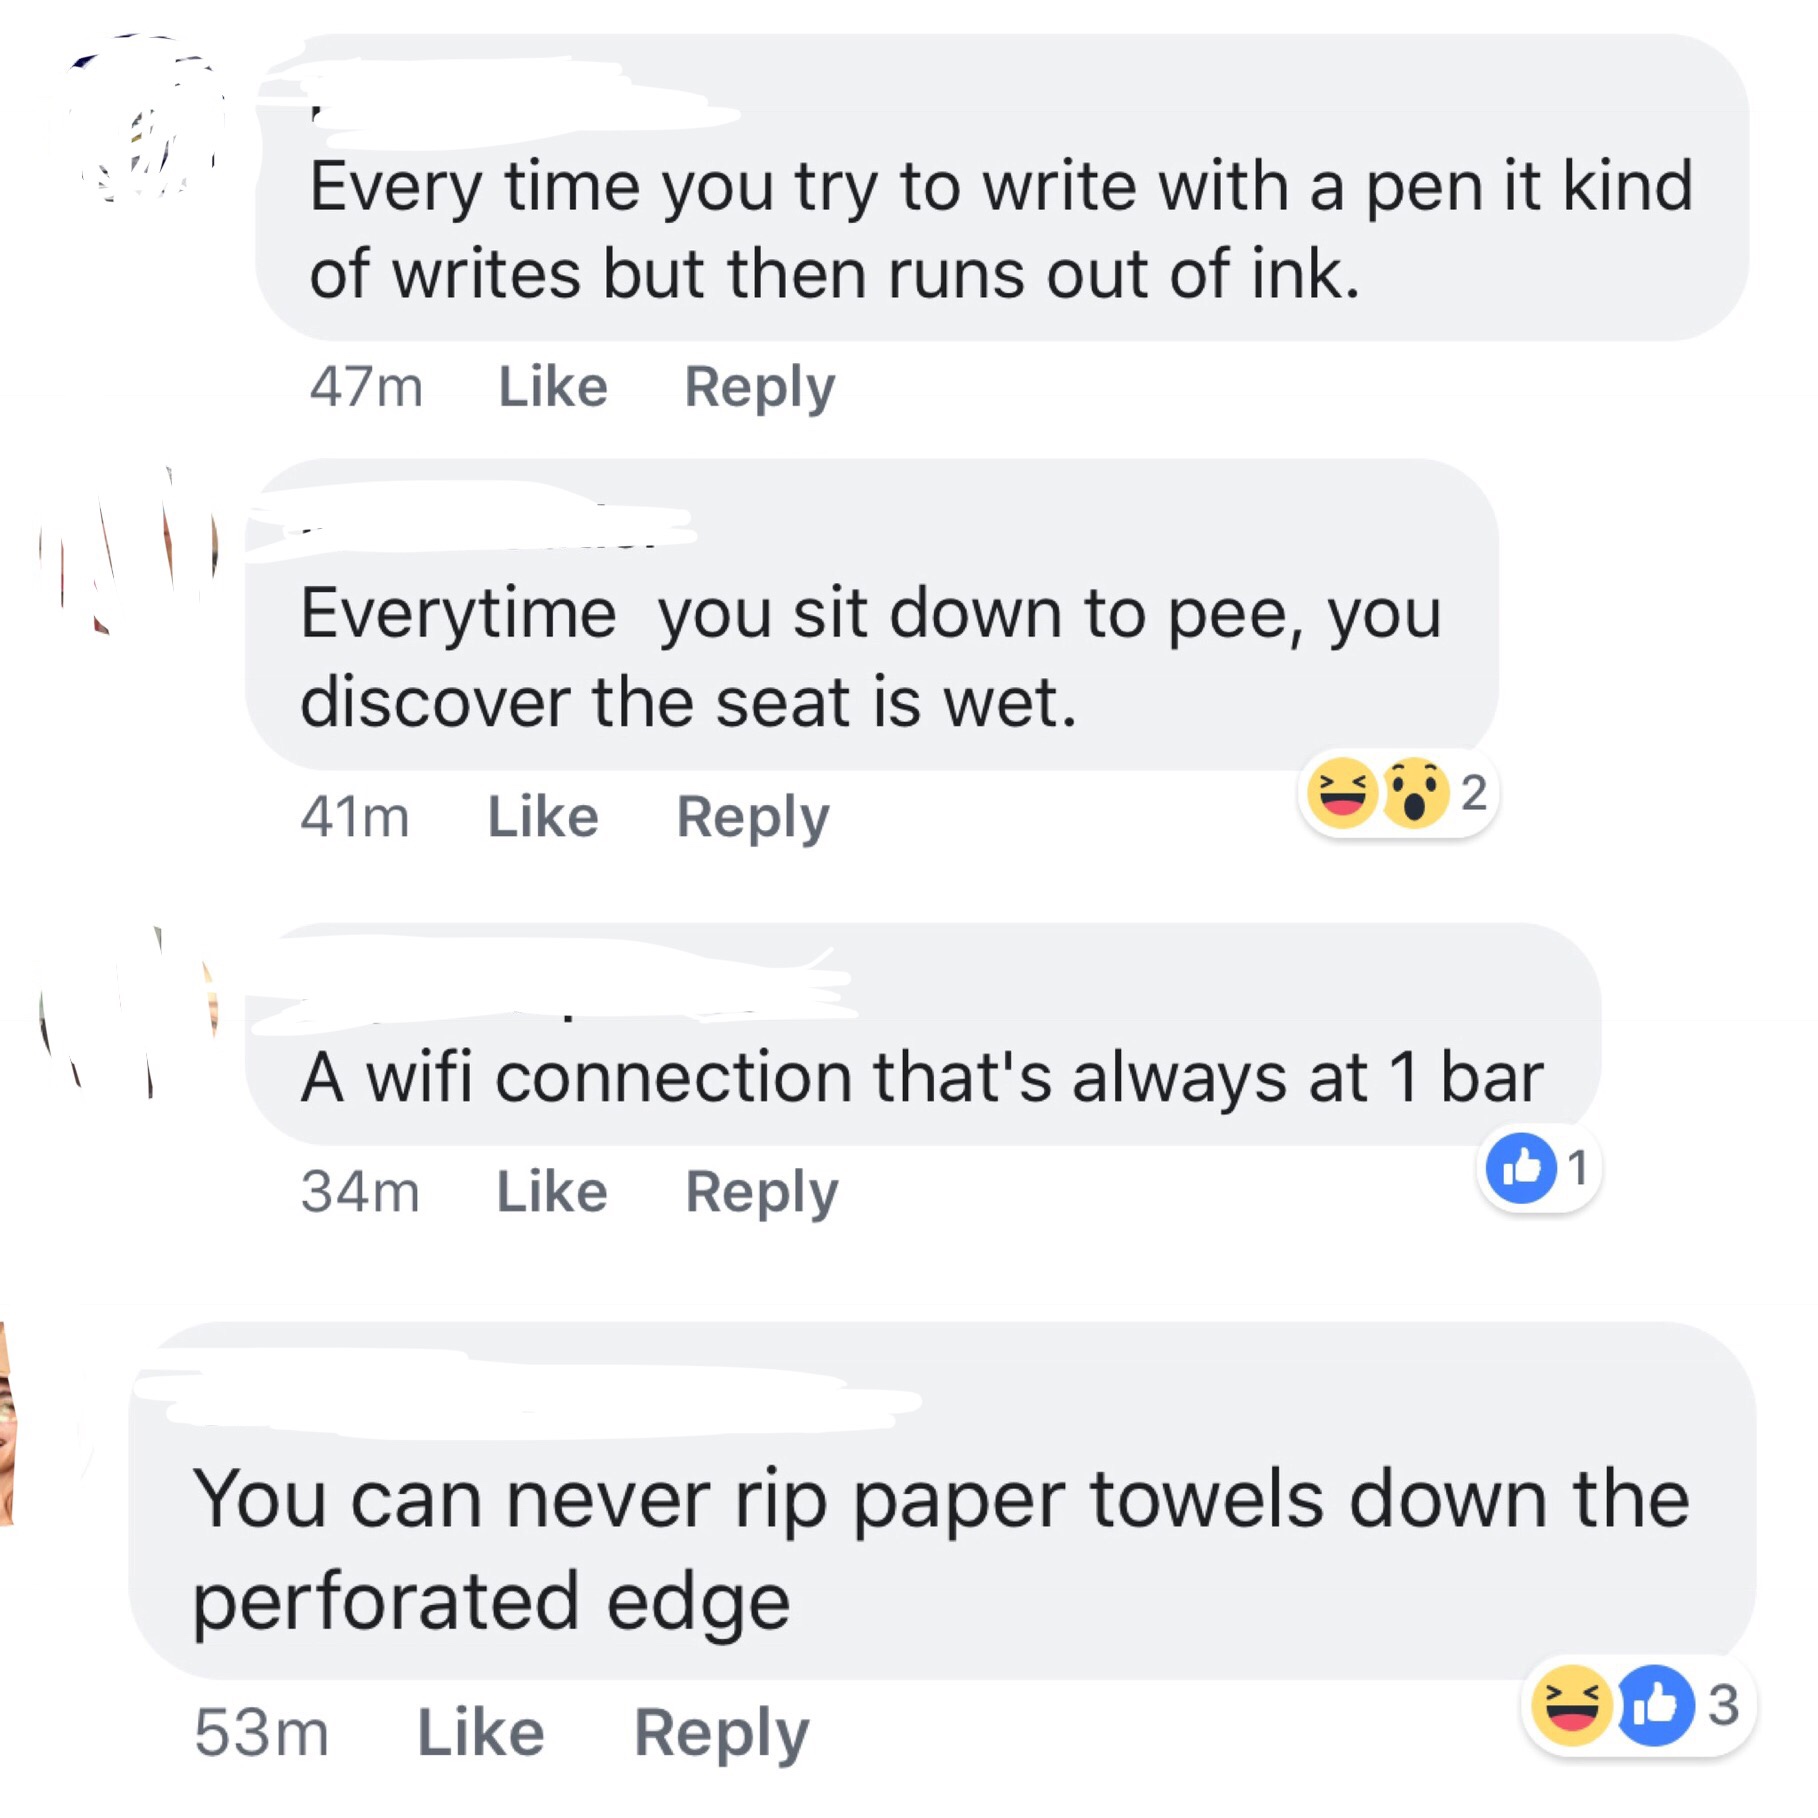 document - Every time you try to write with a pen it kind of writes but then runs out of ink. 47m Everytime you sit down to pee, you discover the seat is wet. 41m 3 2 A wifi connection that's always at 1 bar 34m You can never rip paper towels down the per